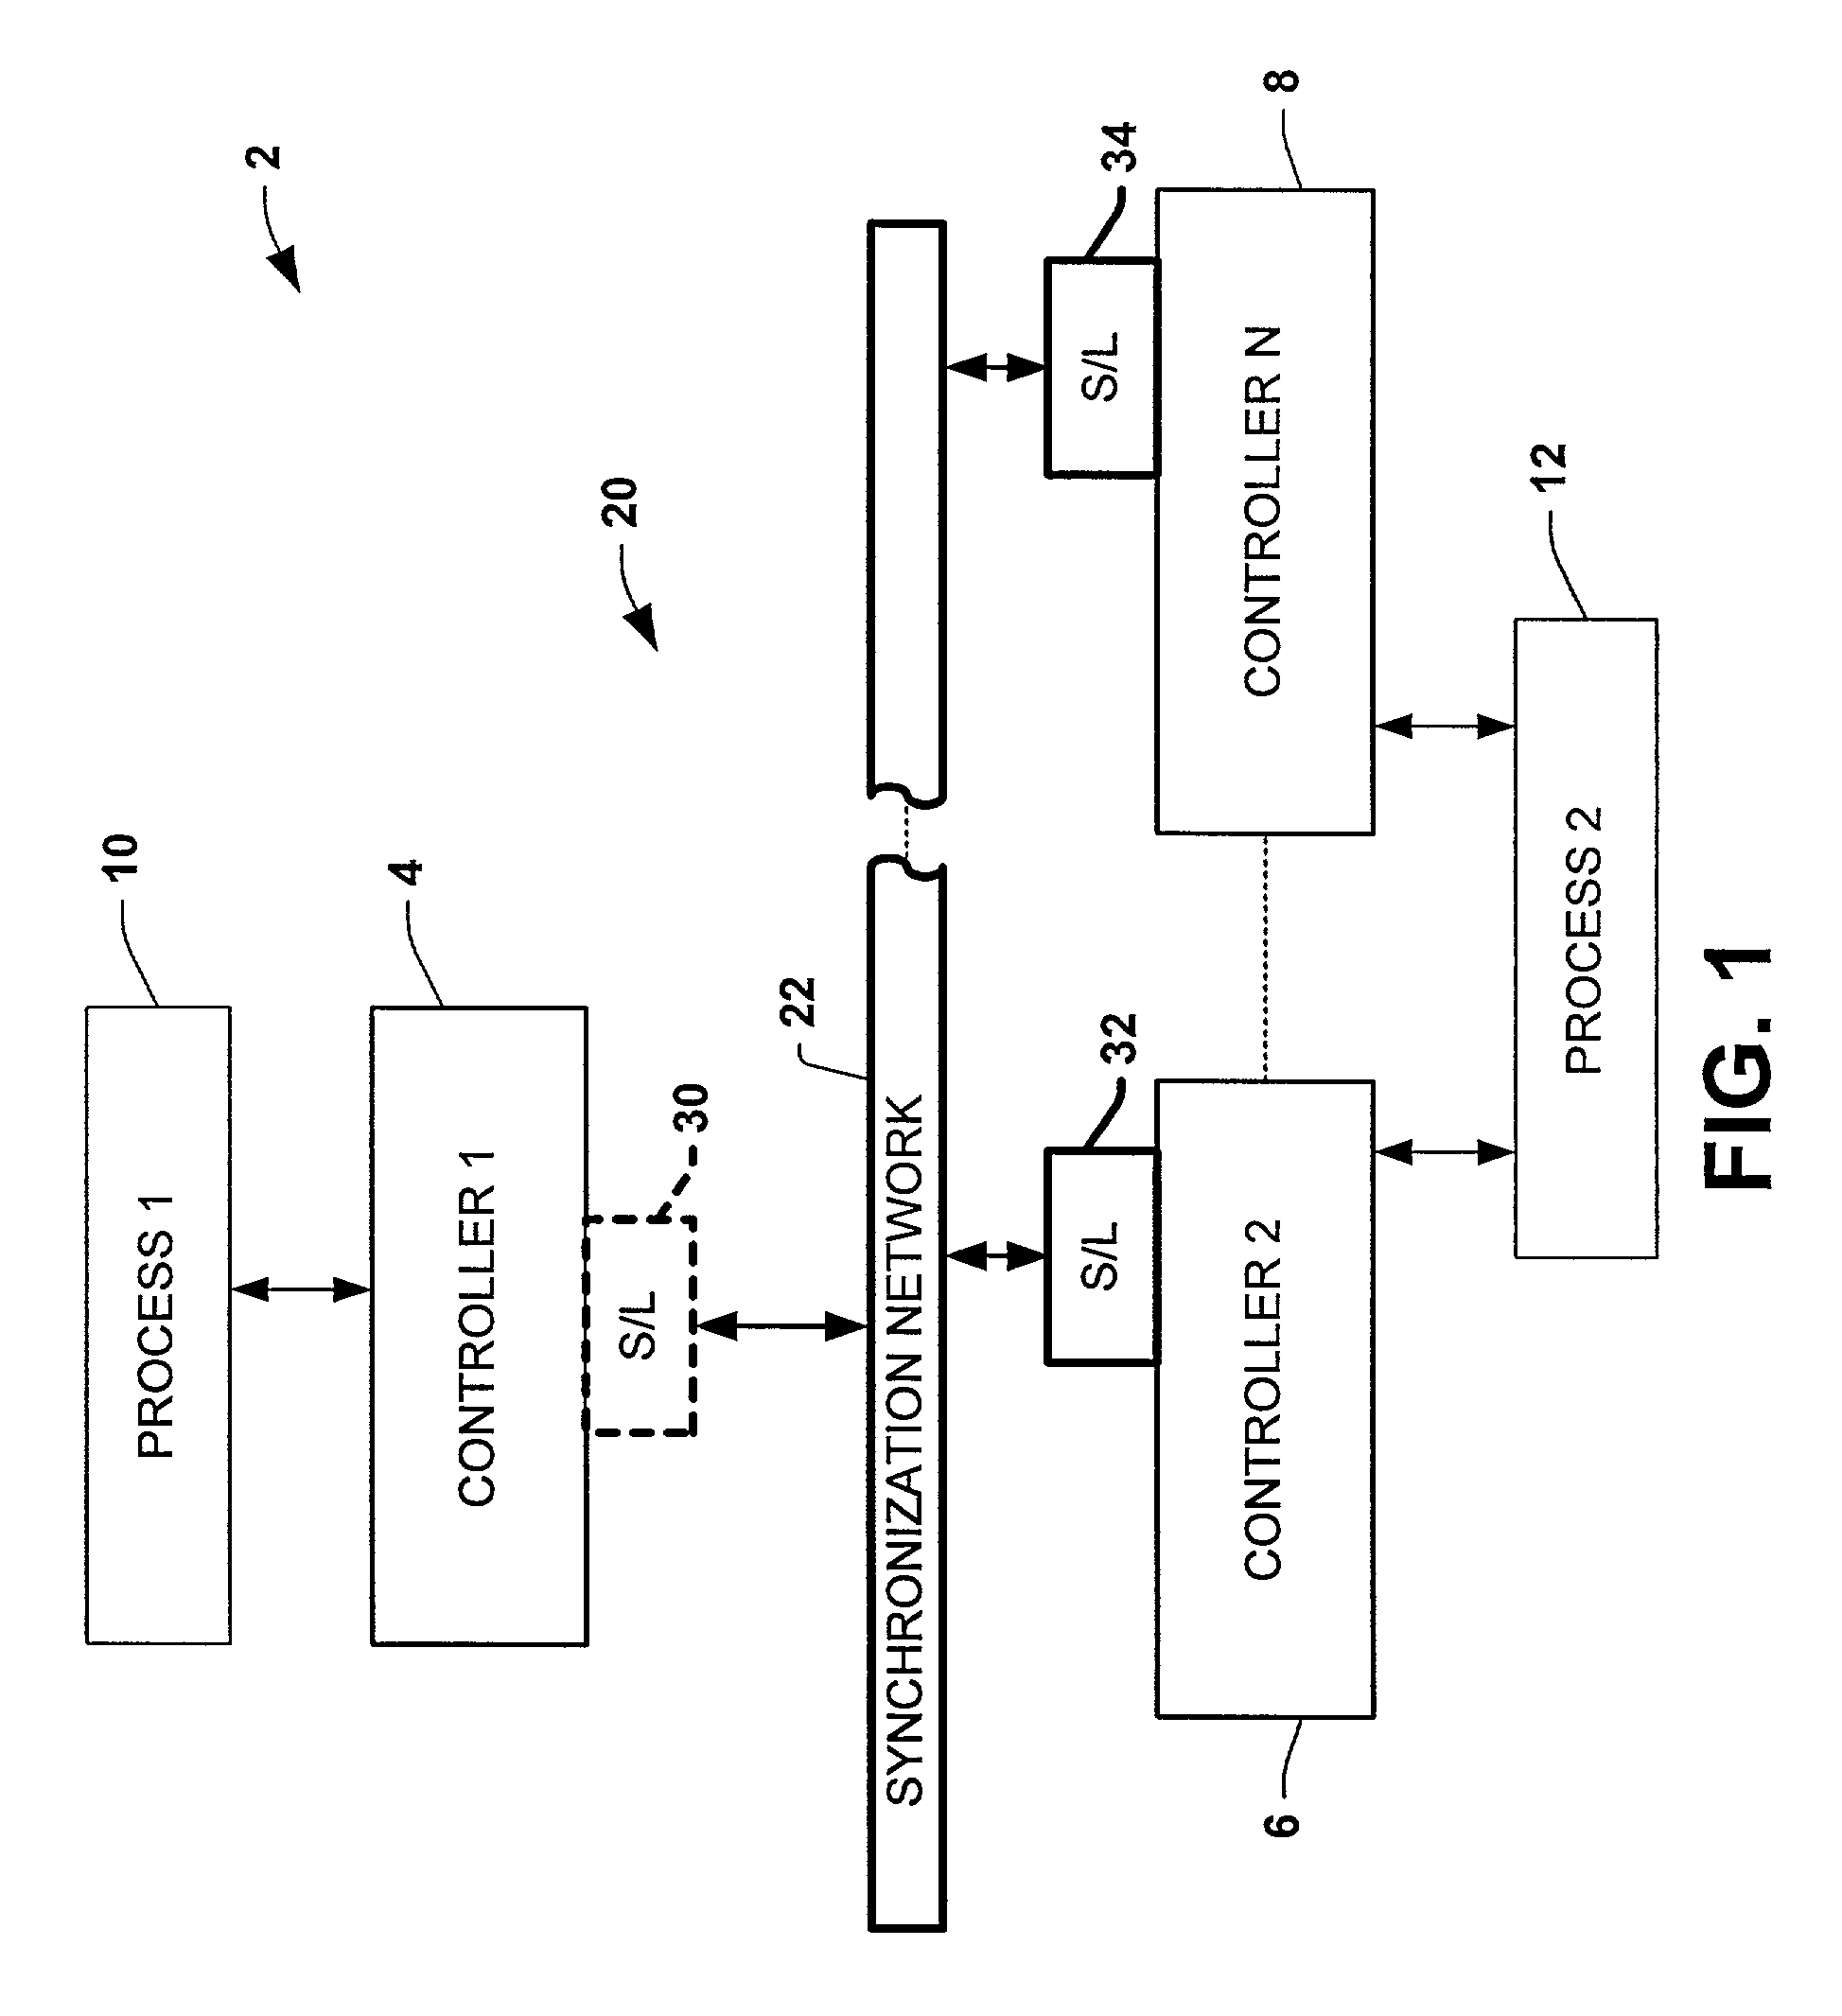 Protocol and method for multi-chassis configurable time synchronization